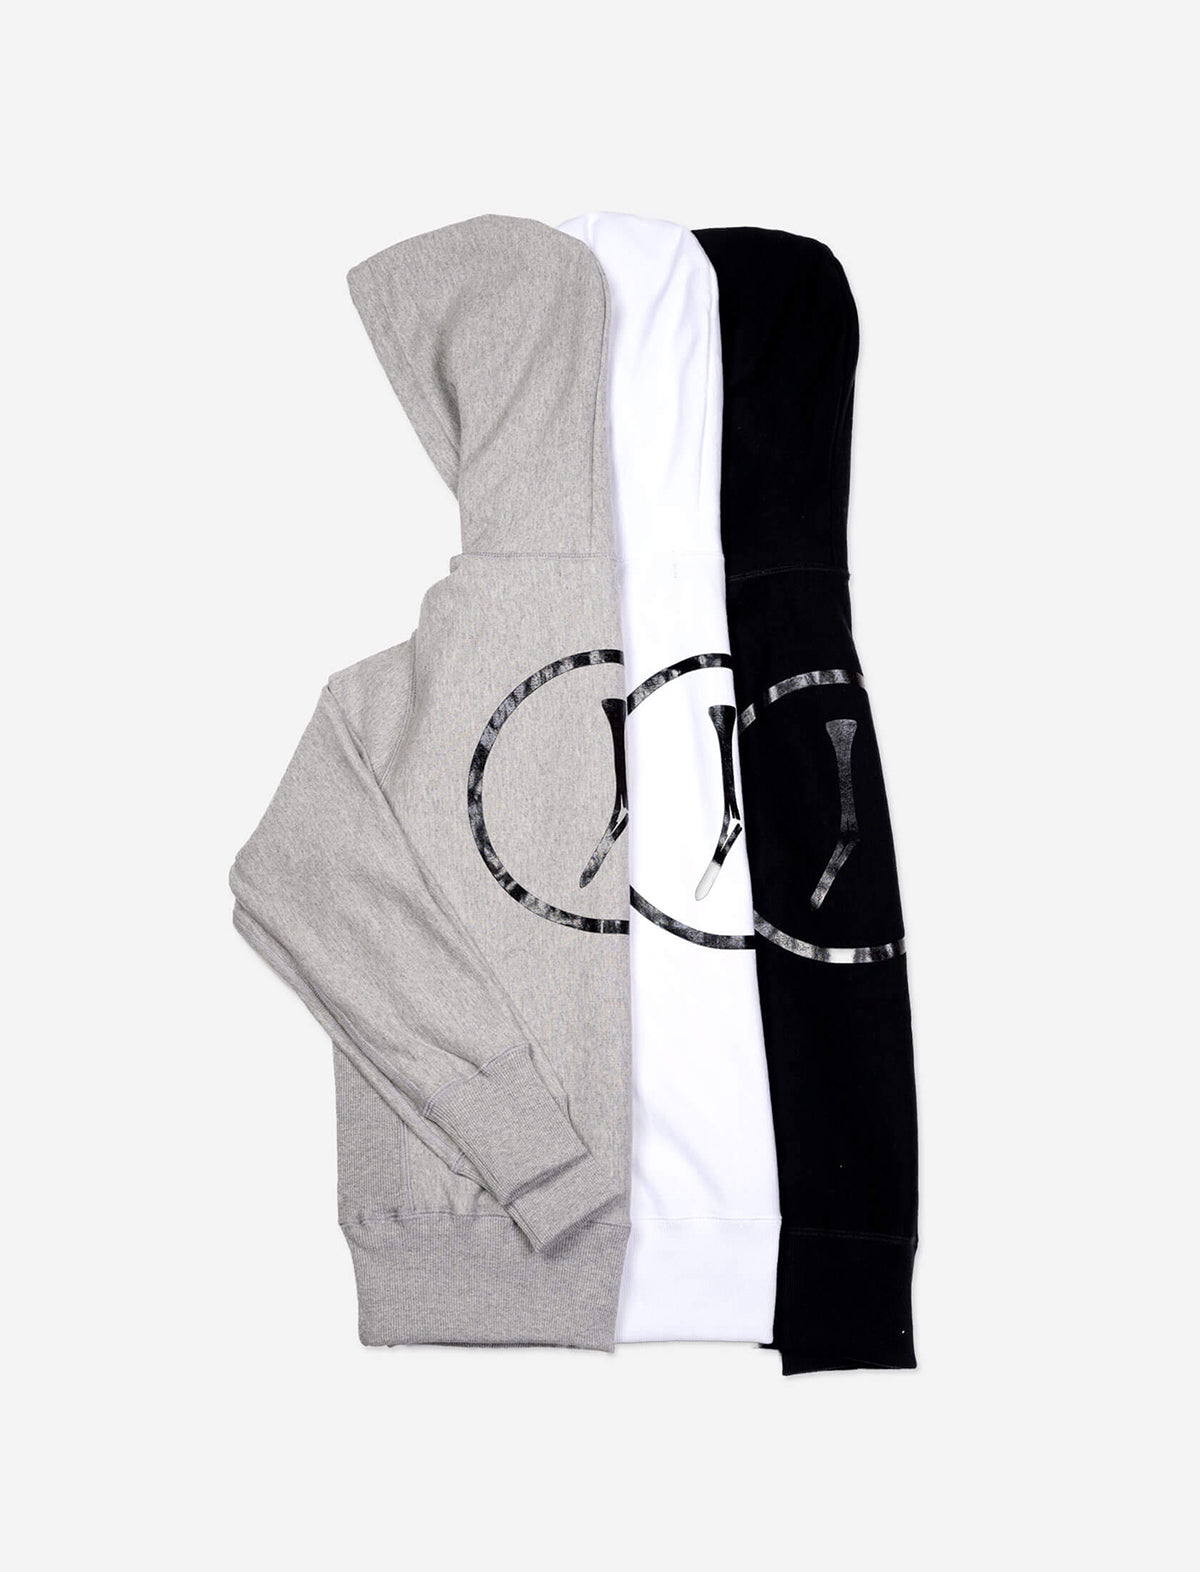 THE GOLFERS JOURNAL The Black Tee Hoodie in White